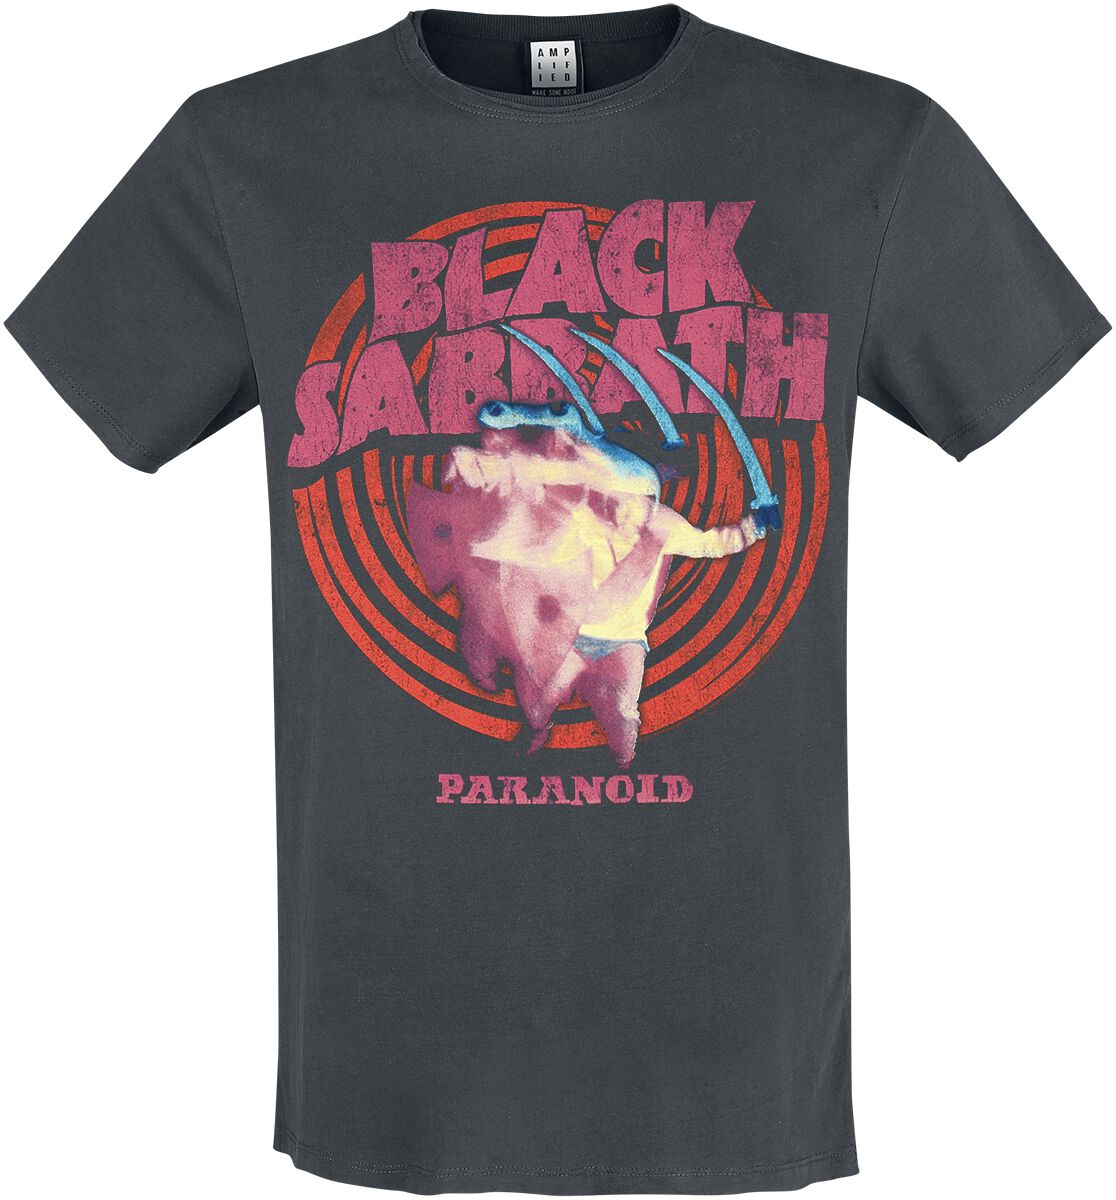 Black Sabbath Amplified Collection - Paranoid T-Shirt charcoal in S